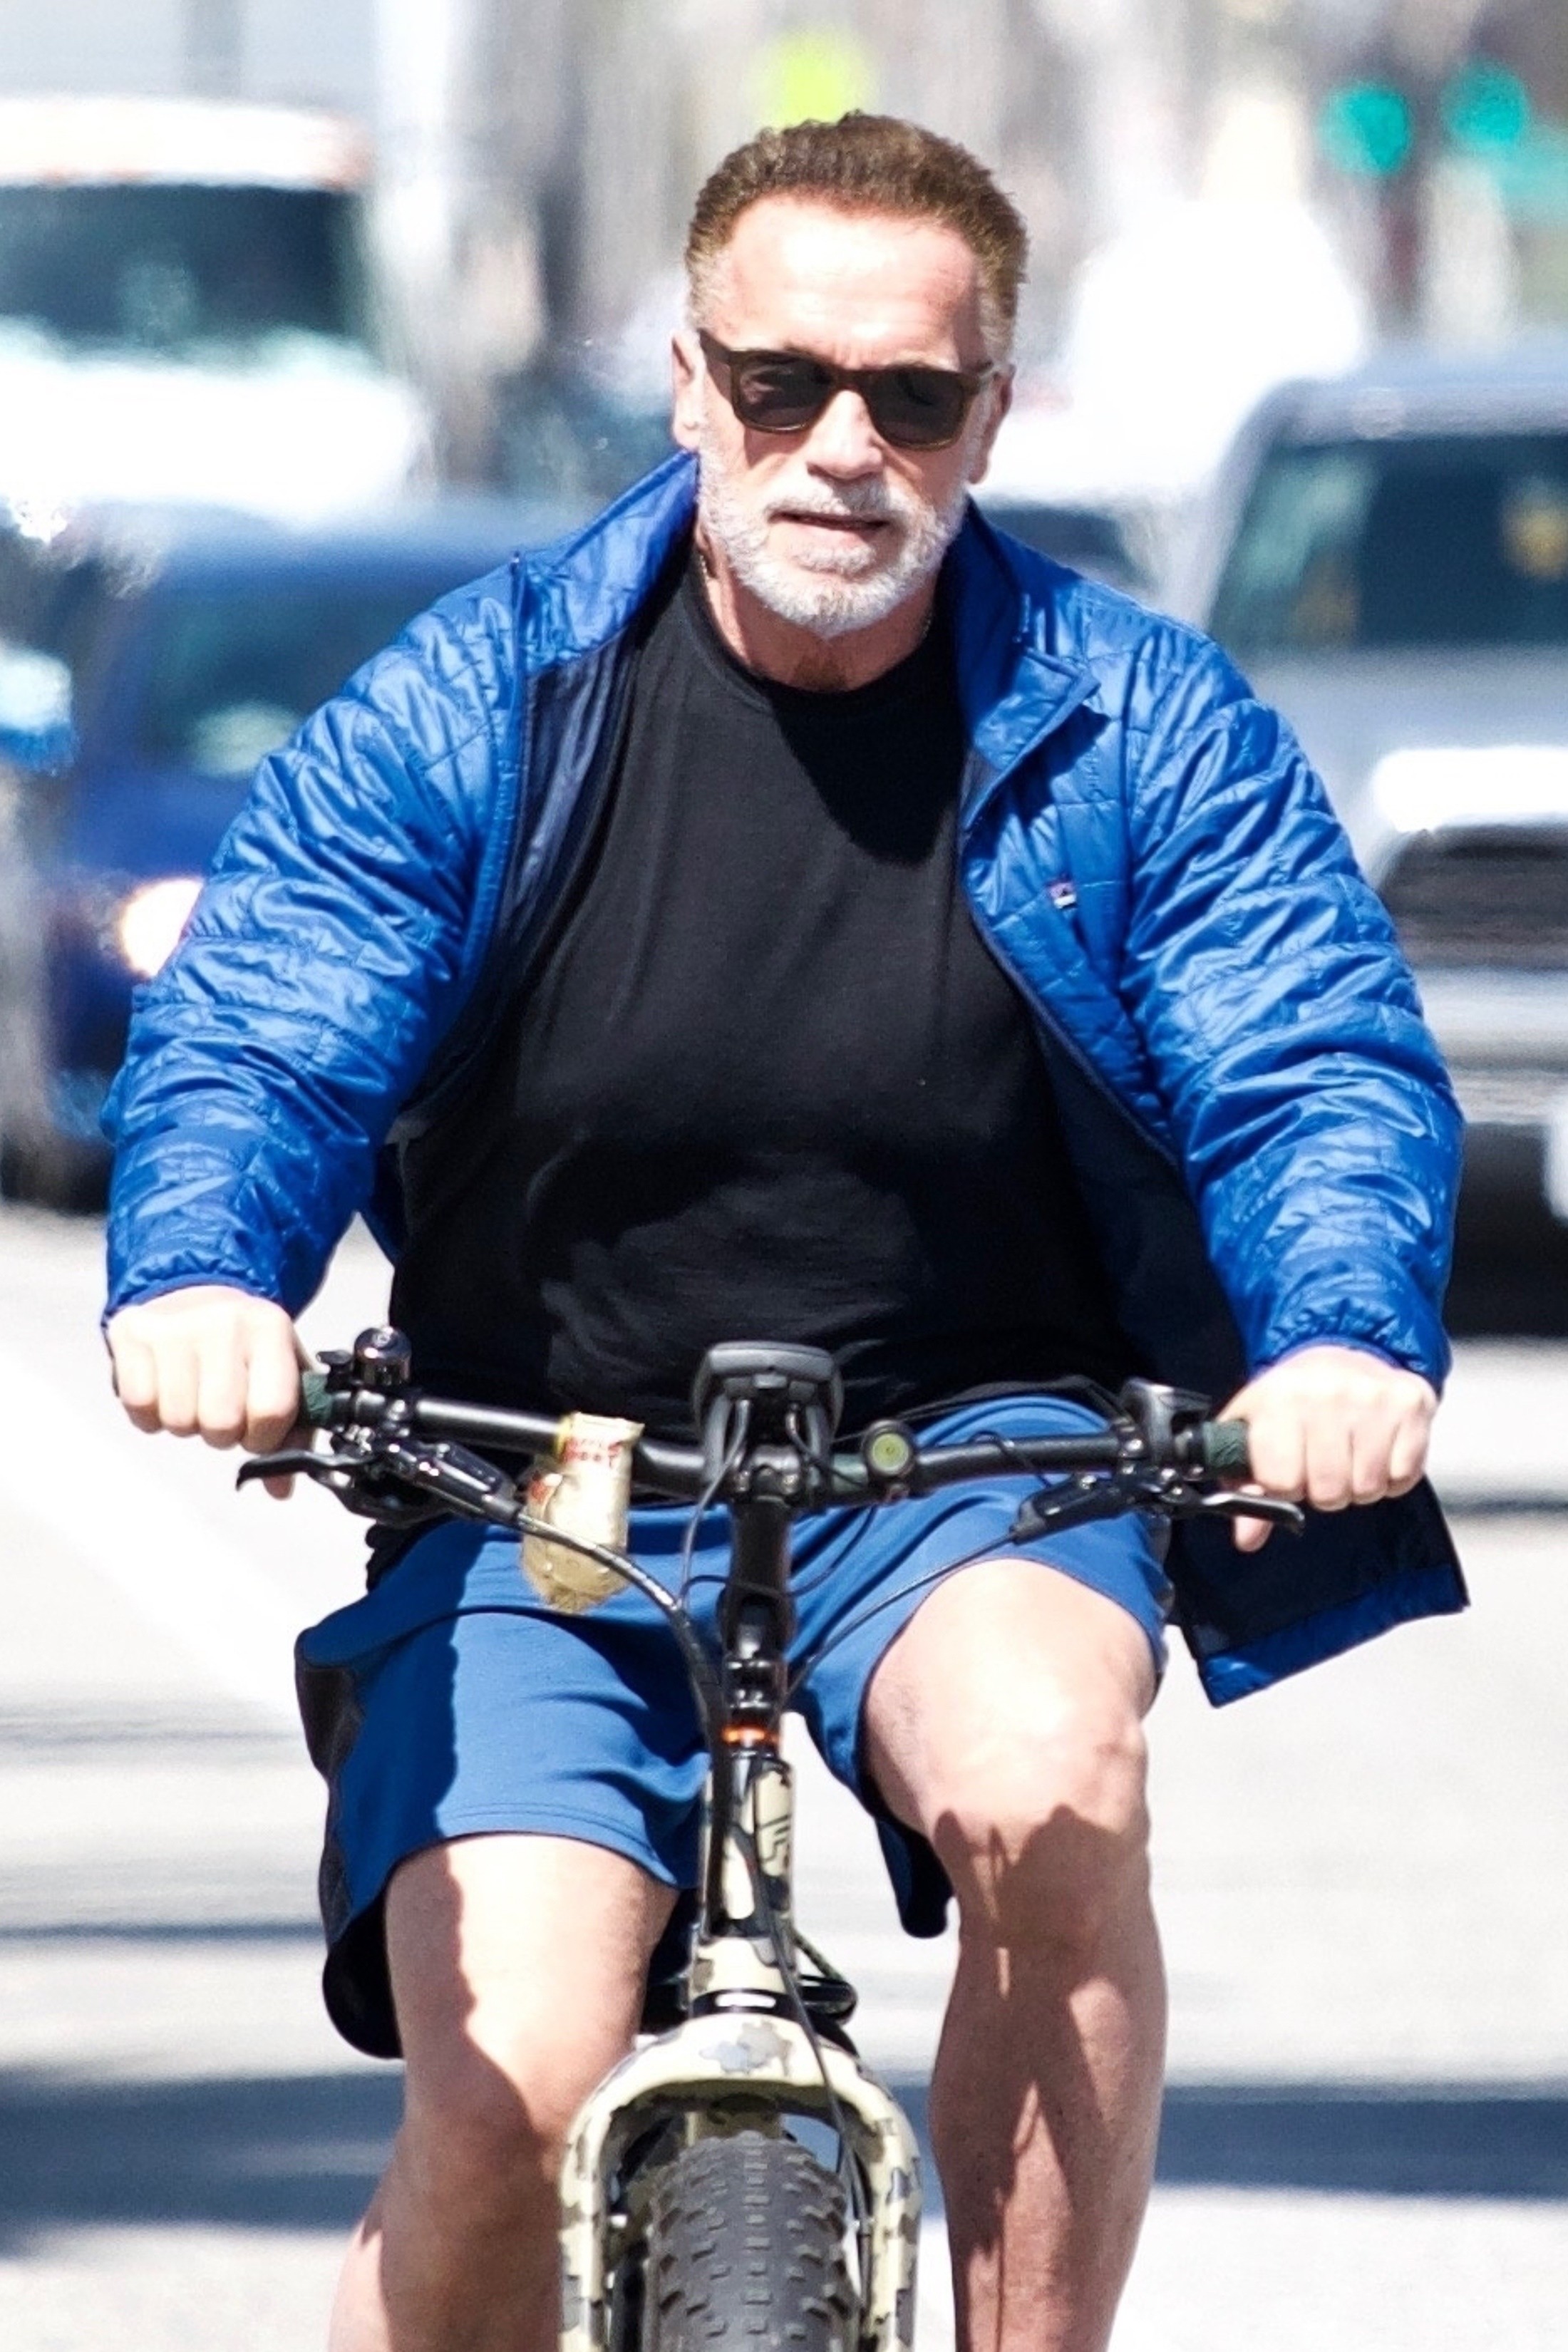 Venice, CA  - Arnold Schwarzenegger is getting a head start to his gym session as the ex-Governor of California bikes to the gym alongside a friend. Arnold nonchalantly bikes through Los Angeles while maintaining a conversation with his gym buddy.Pict (Foto: GAL / BACKGRID)